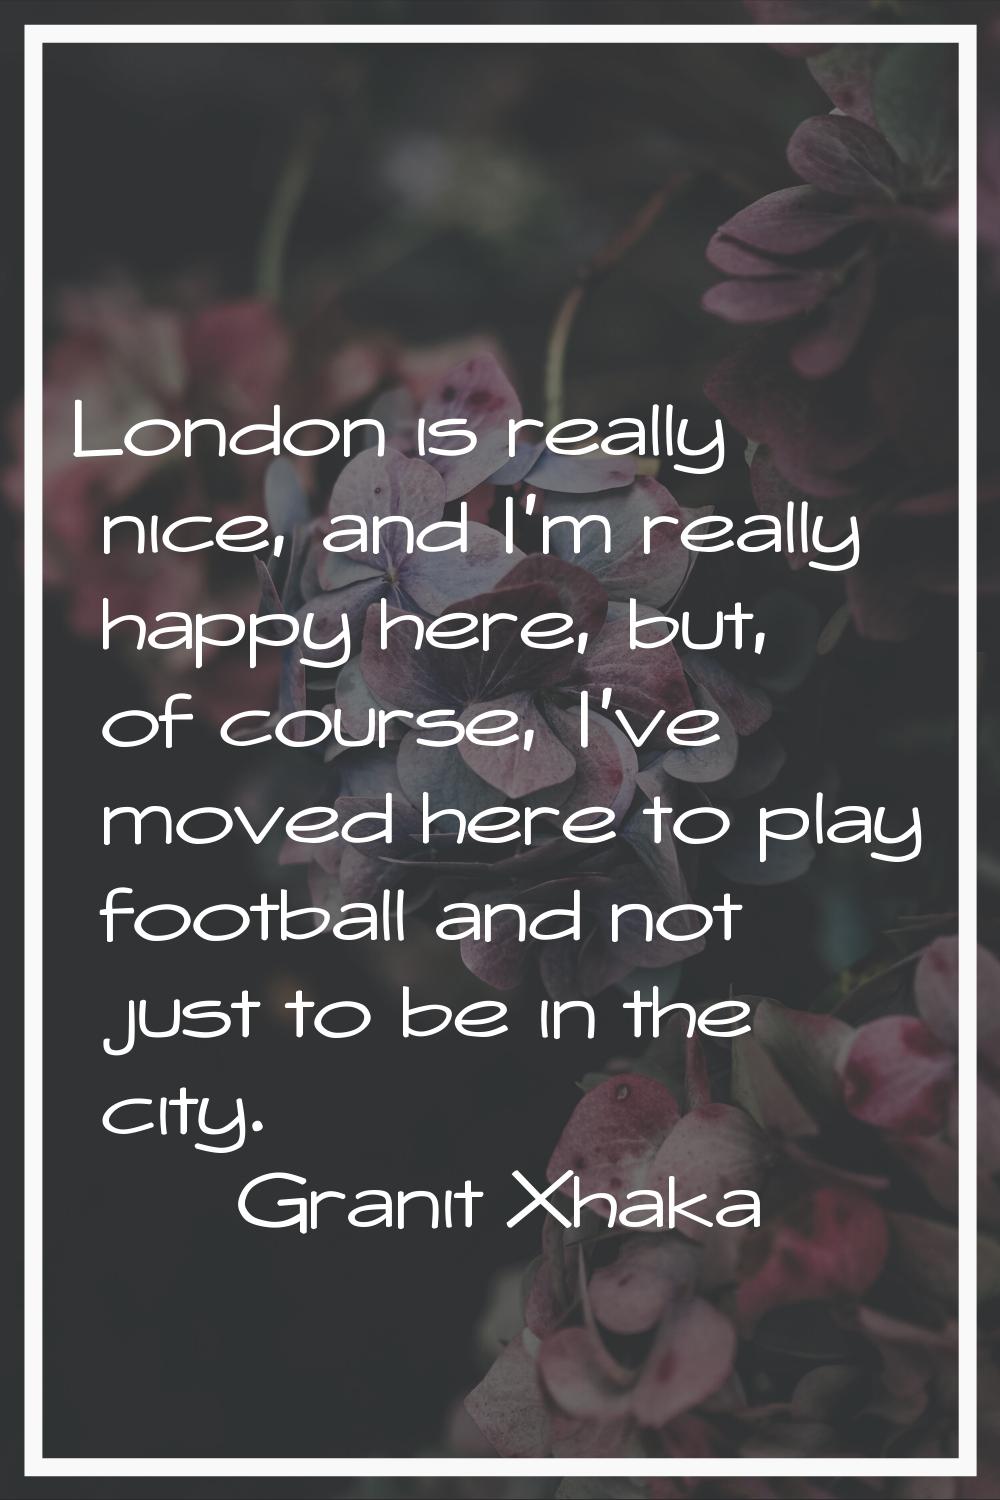 London is really nice, and I'm really happy here, but, of course, I've moved here to play football 